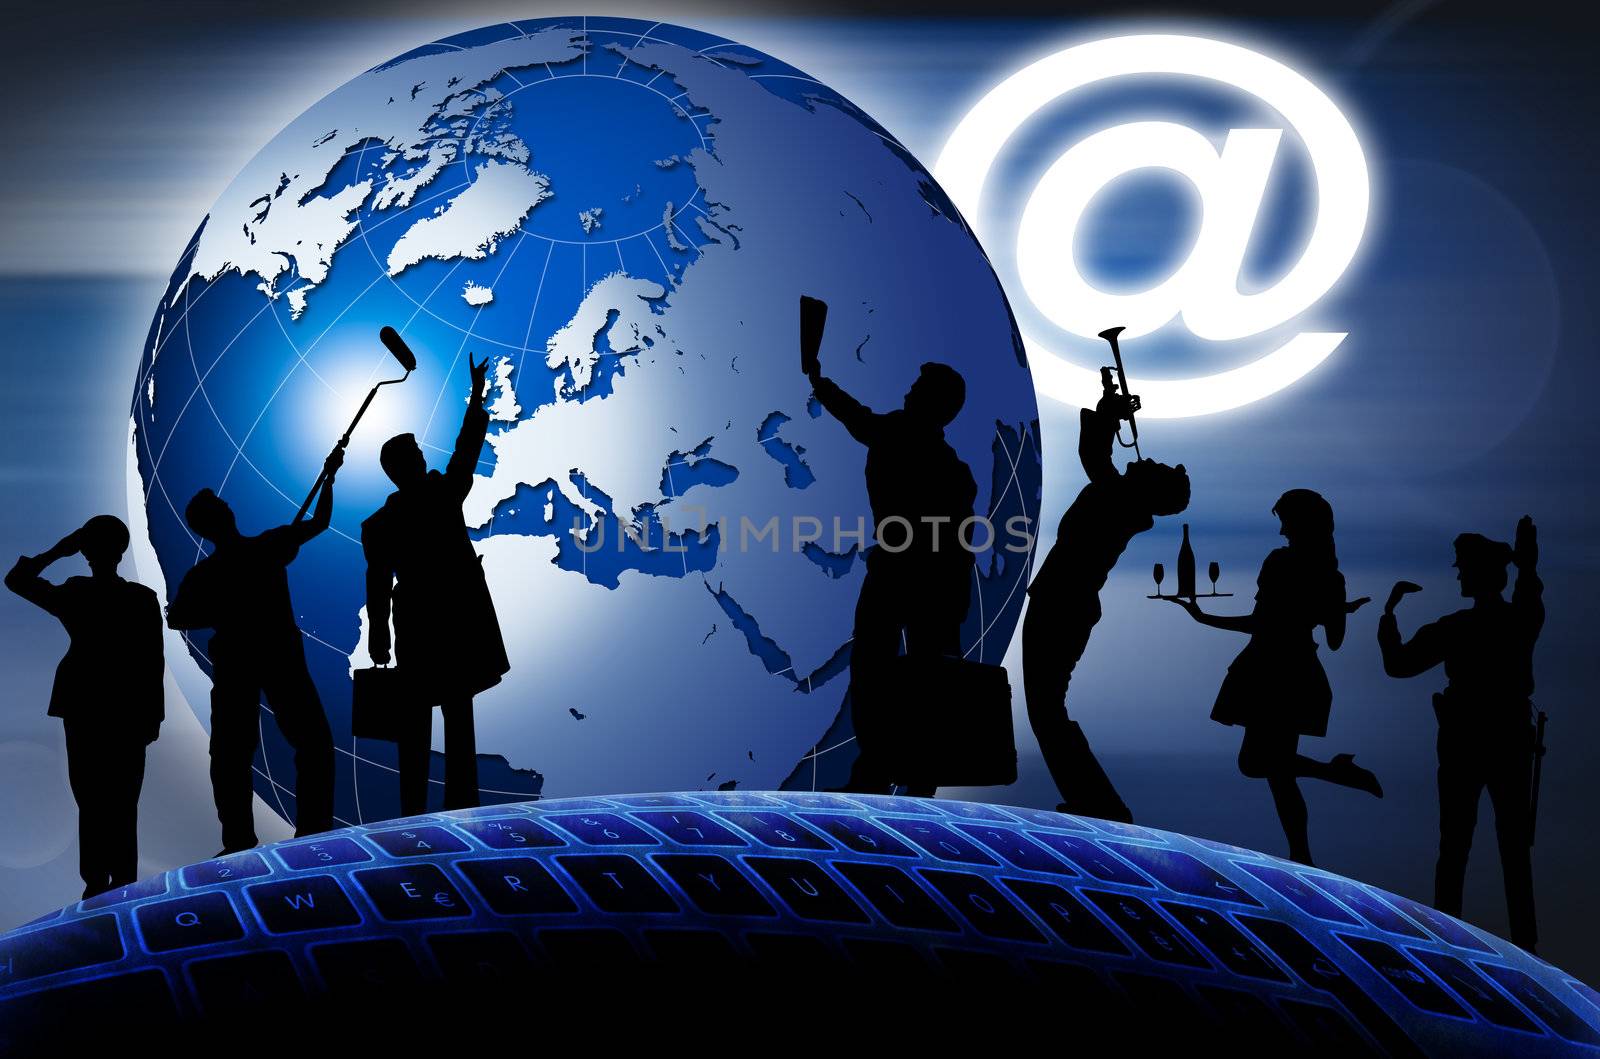 Black silhouettes of men and women at work, blue background with the world and the computer keyboard